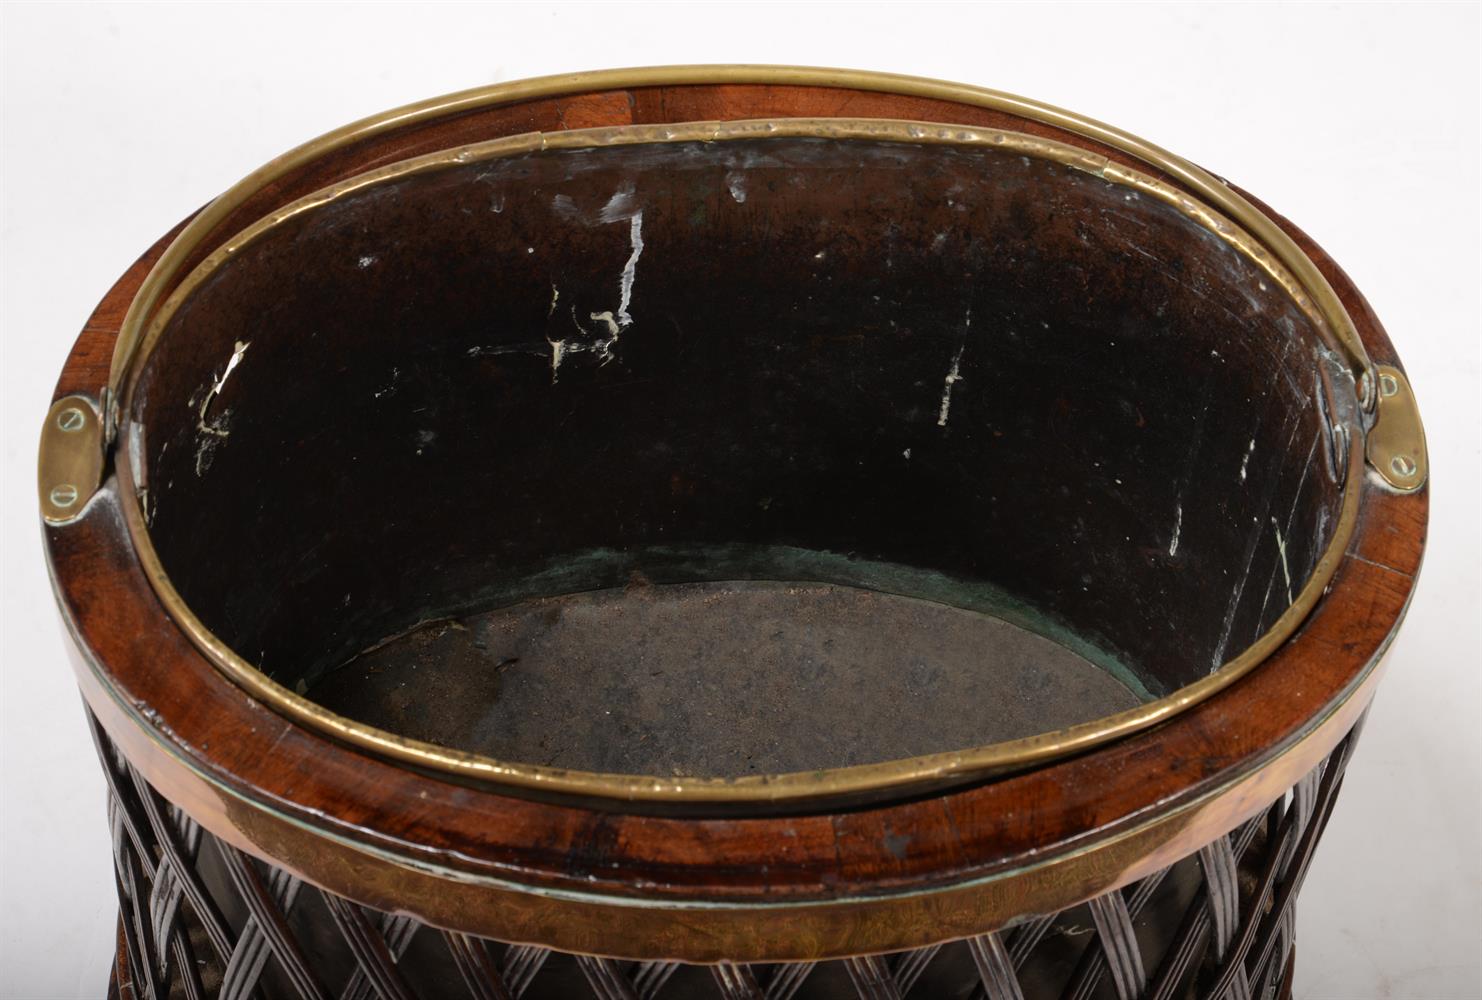 A GEORGE III MAHOGANY OYSTER BUCKET, LATE 18TH/EARLY 19TH CENTURY - Image 4 of 4